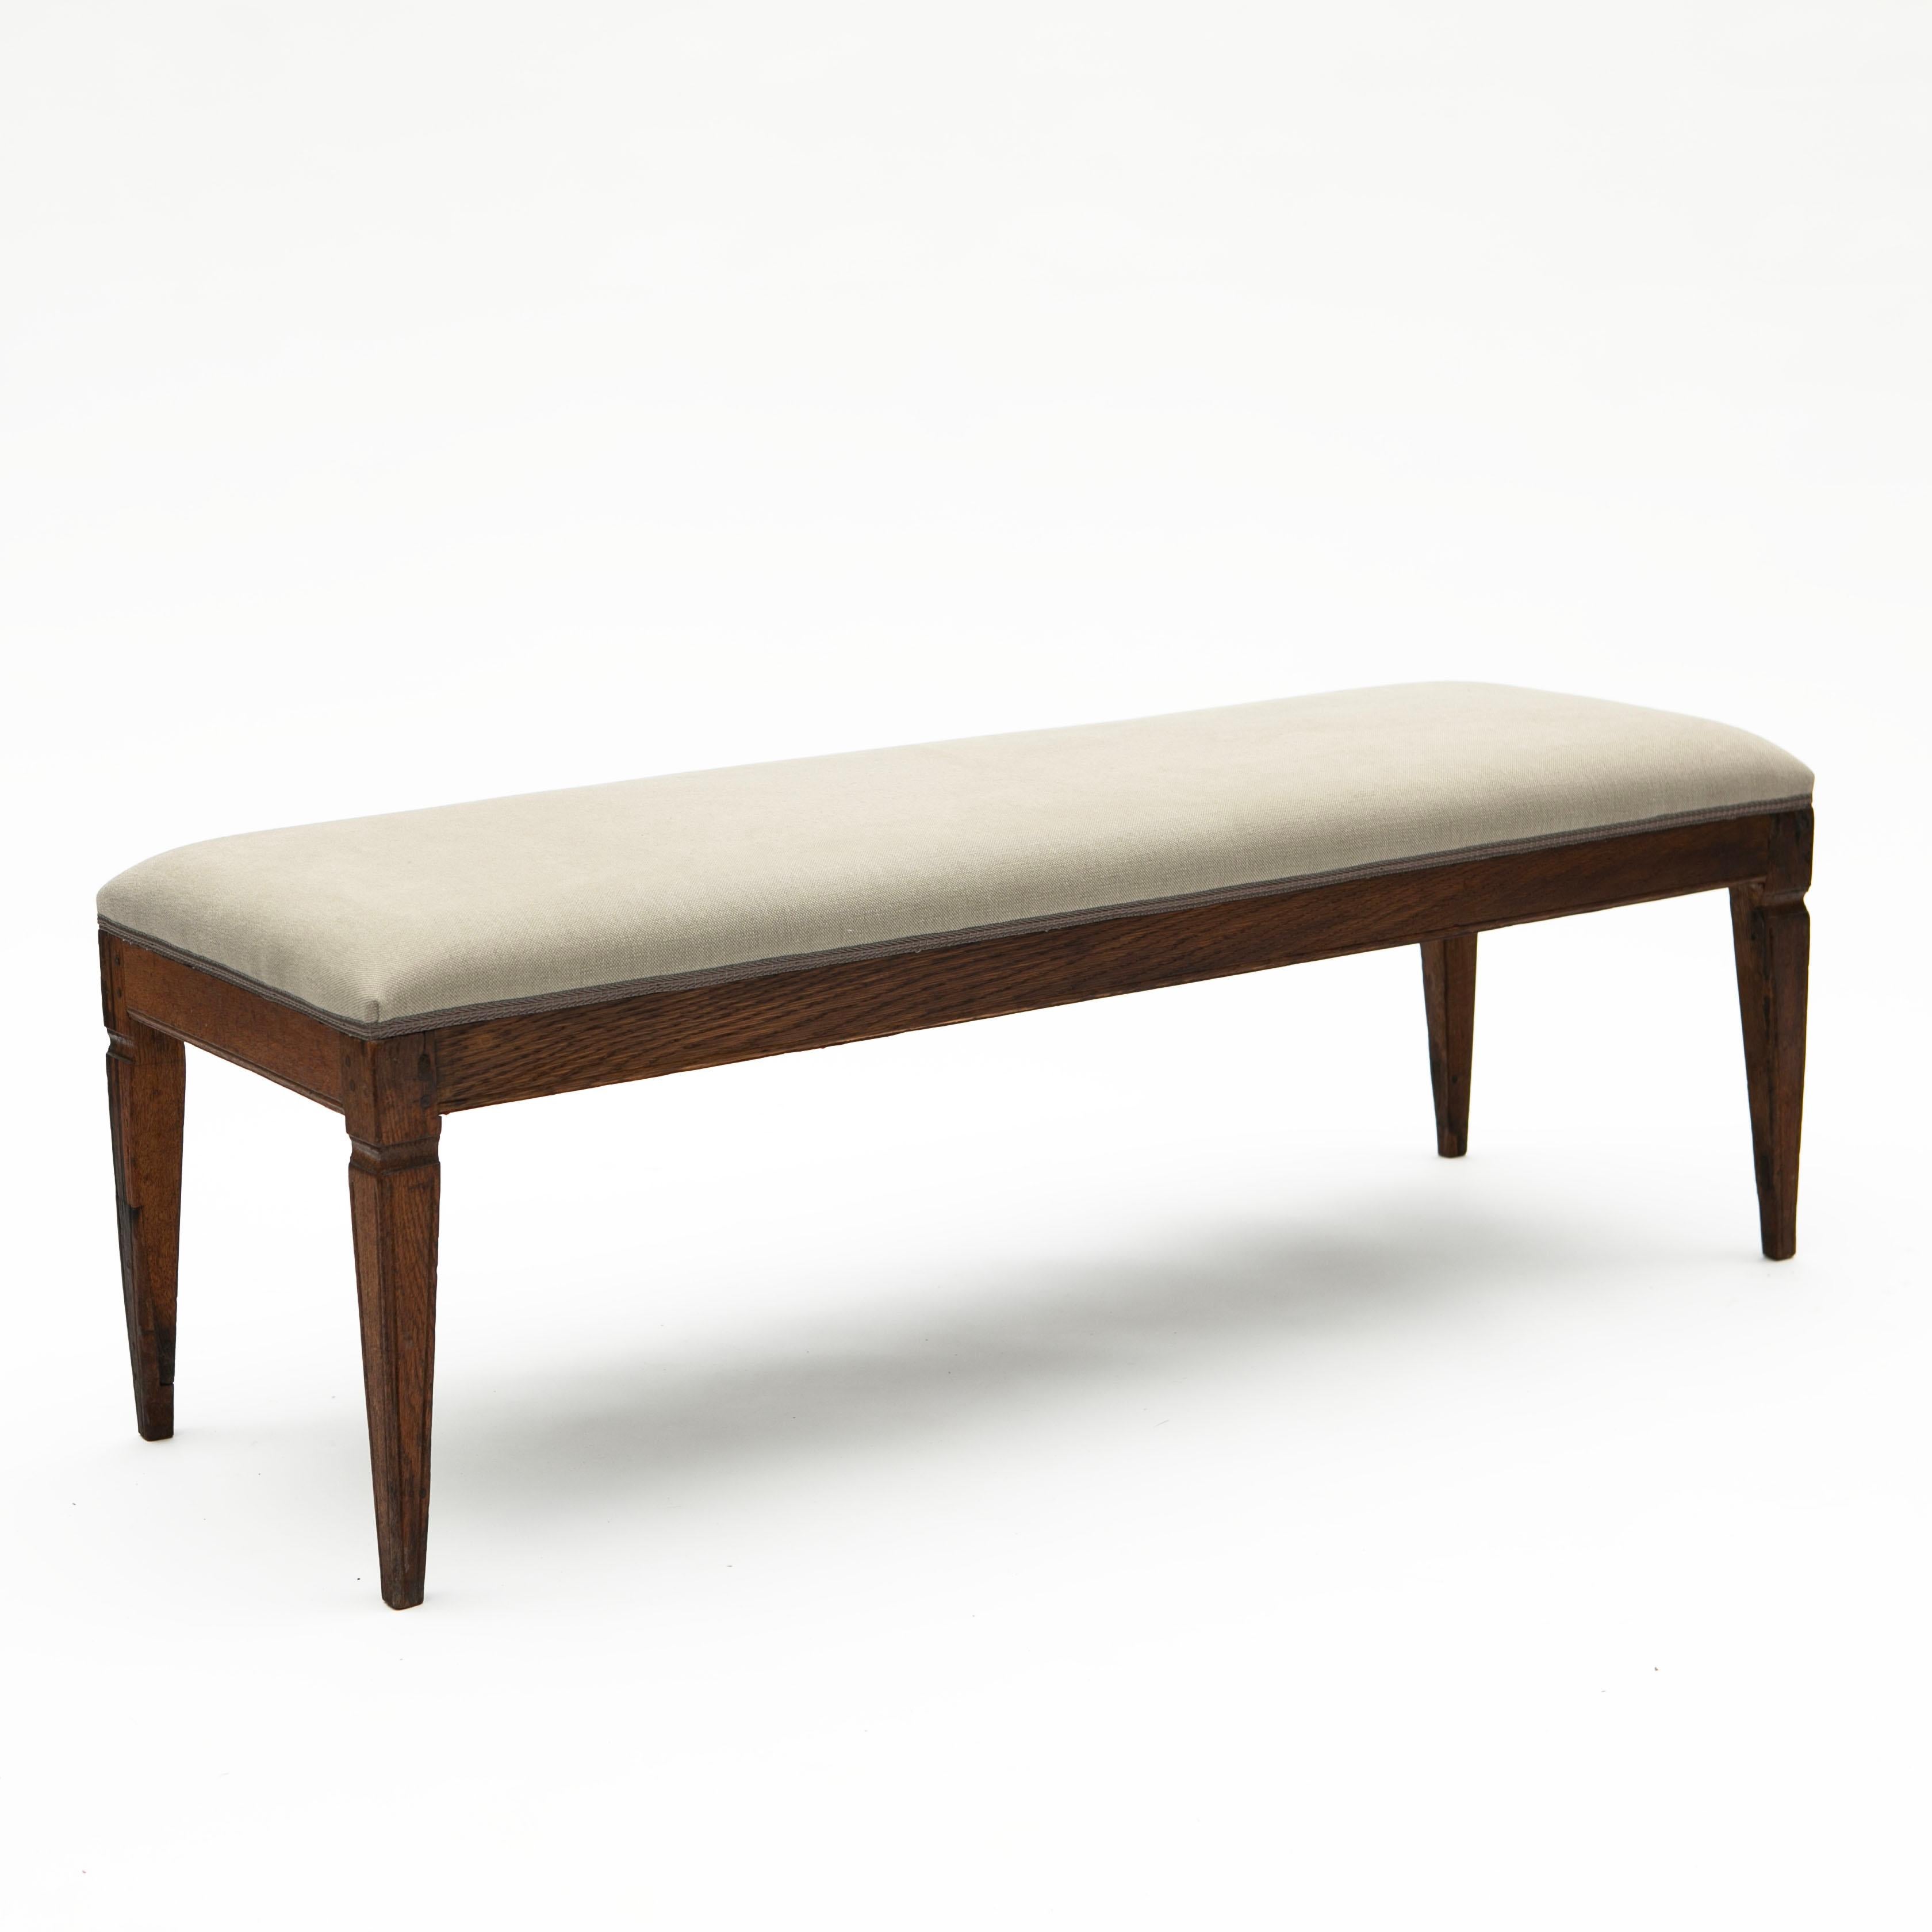 Louis XVI bench in oak, newly upholstered in light mist-gray linen.
Features apron with profiled edge resting on tapered legs.

Originating from Denmark, 1780-1800